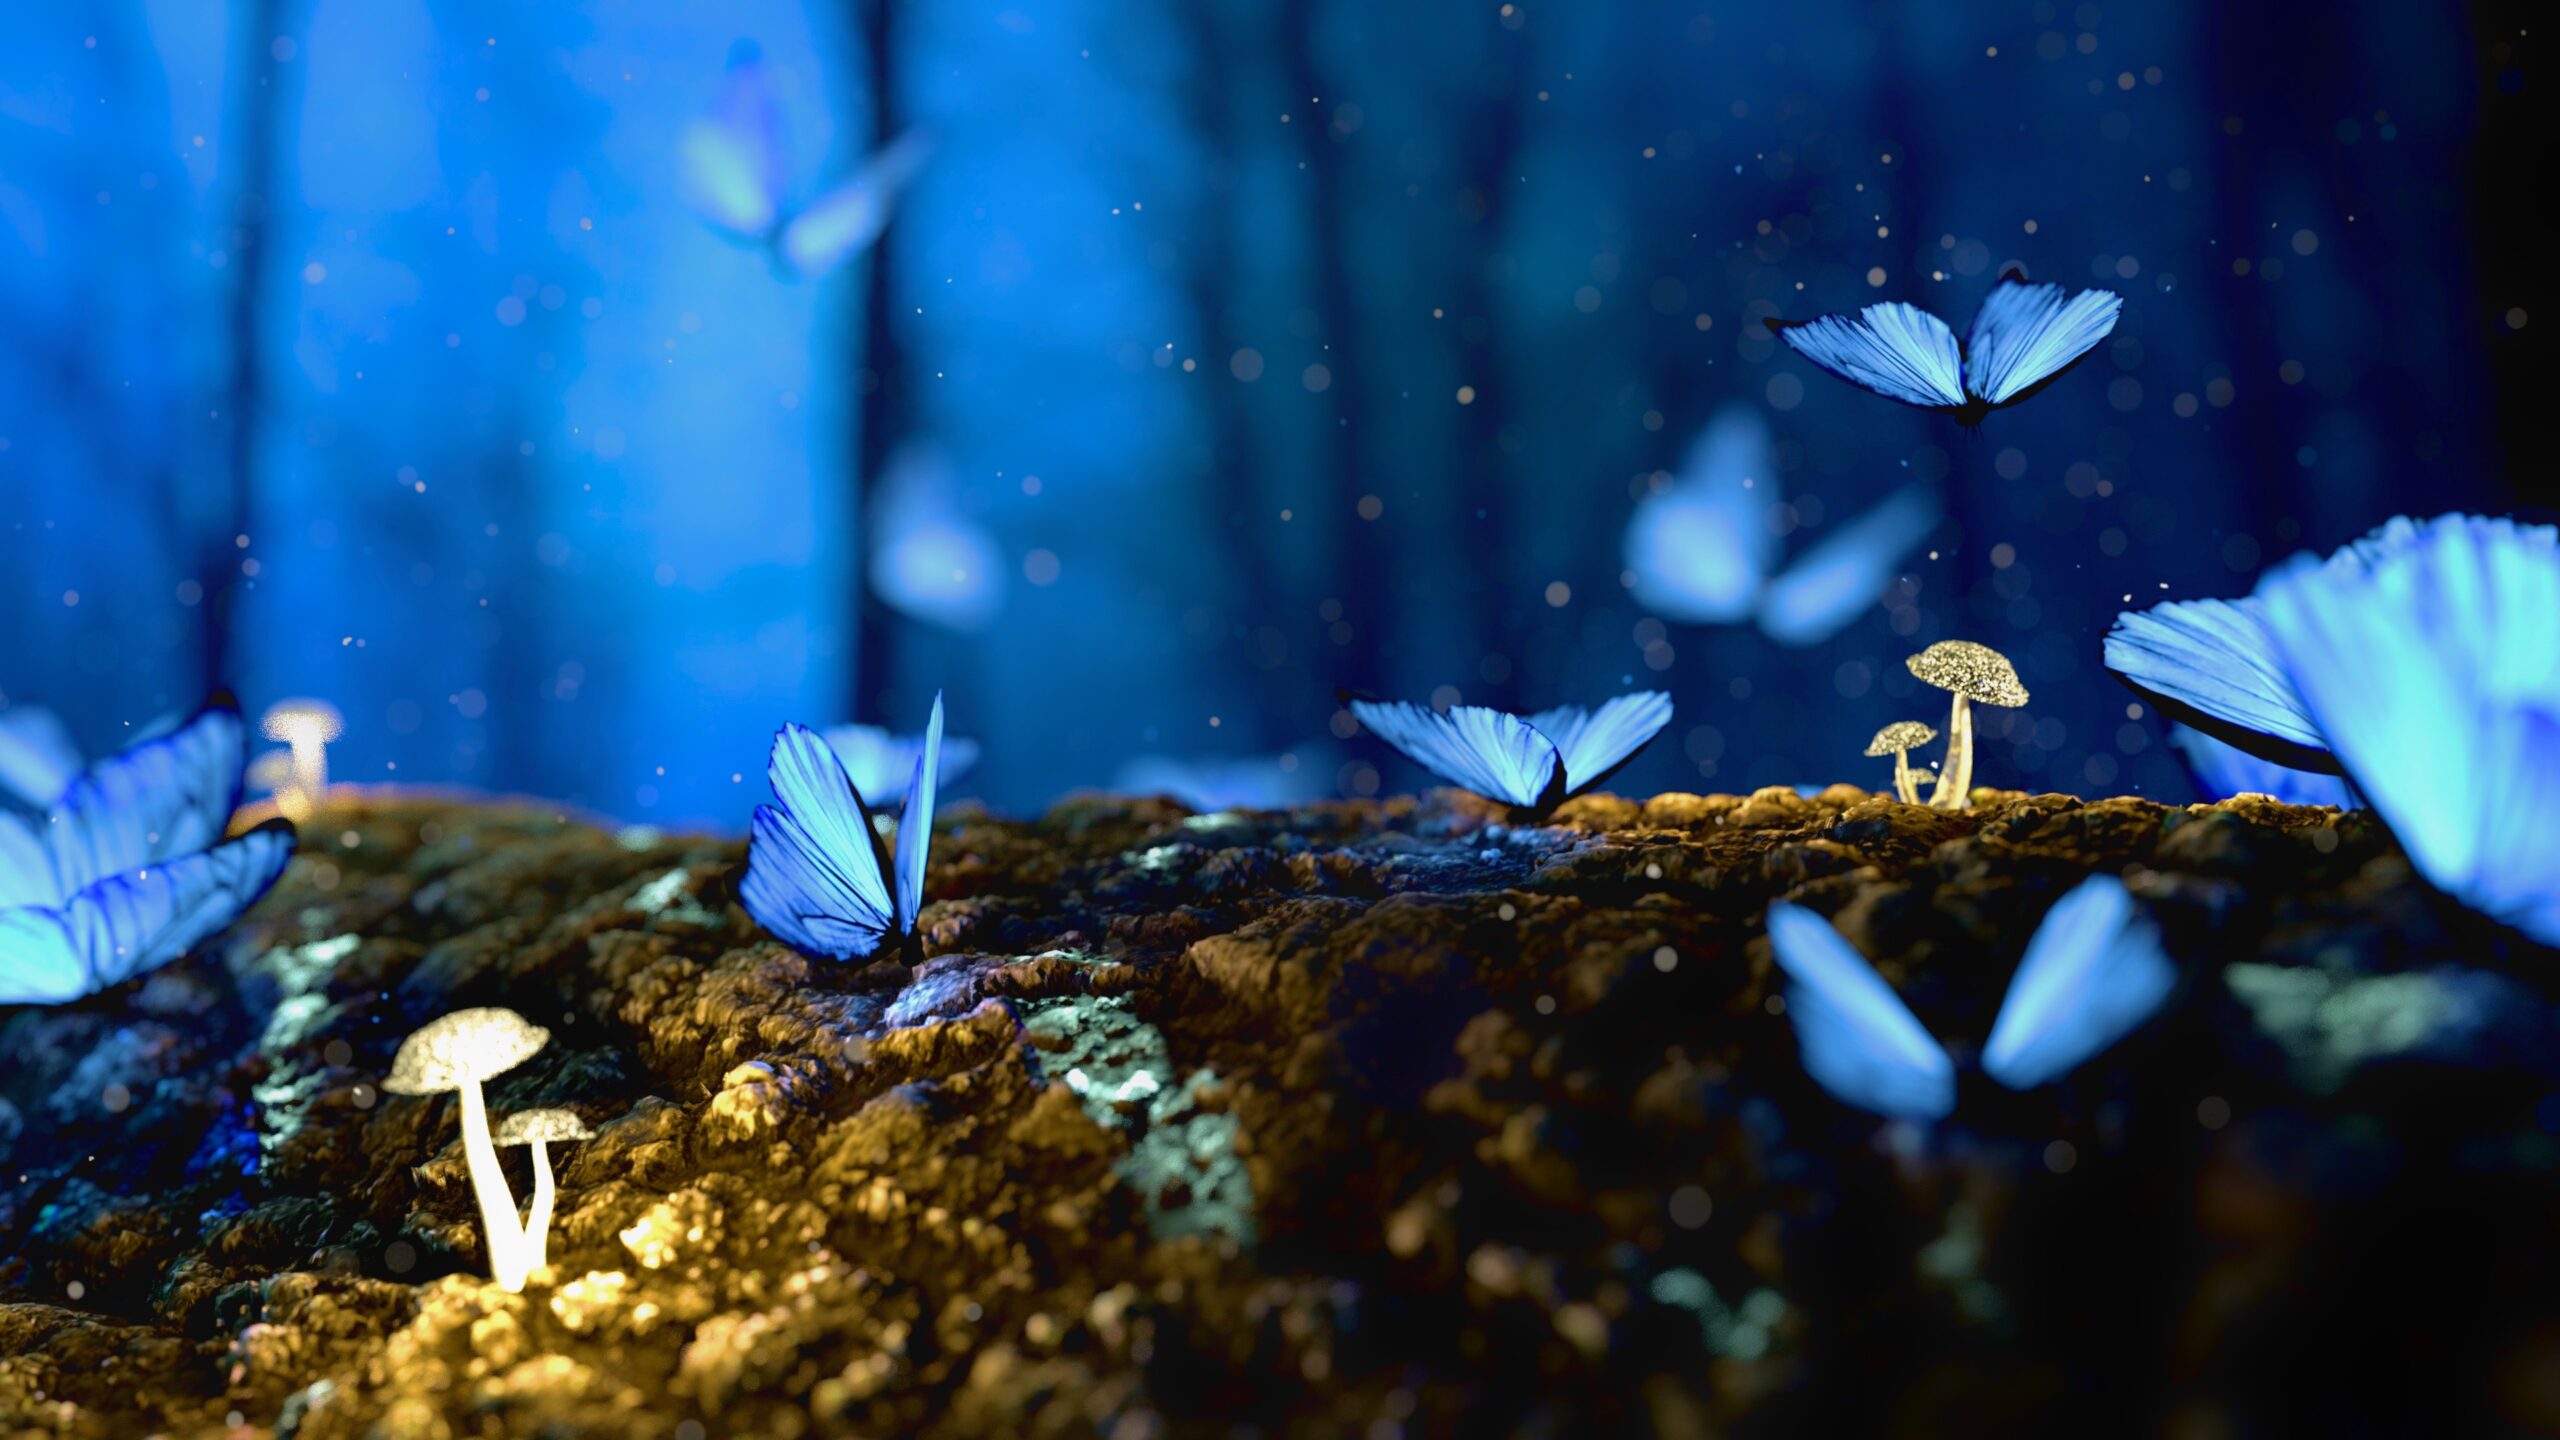 Butterfly Computer Background